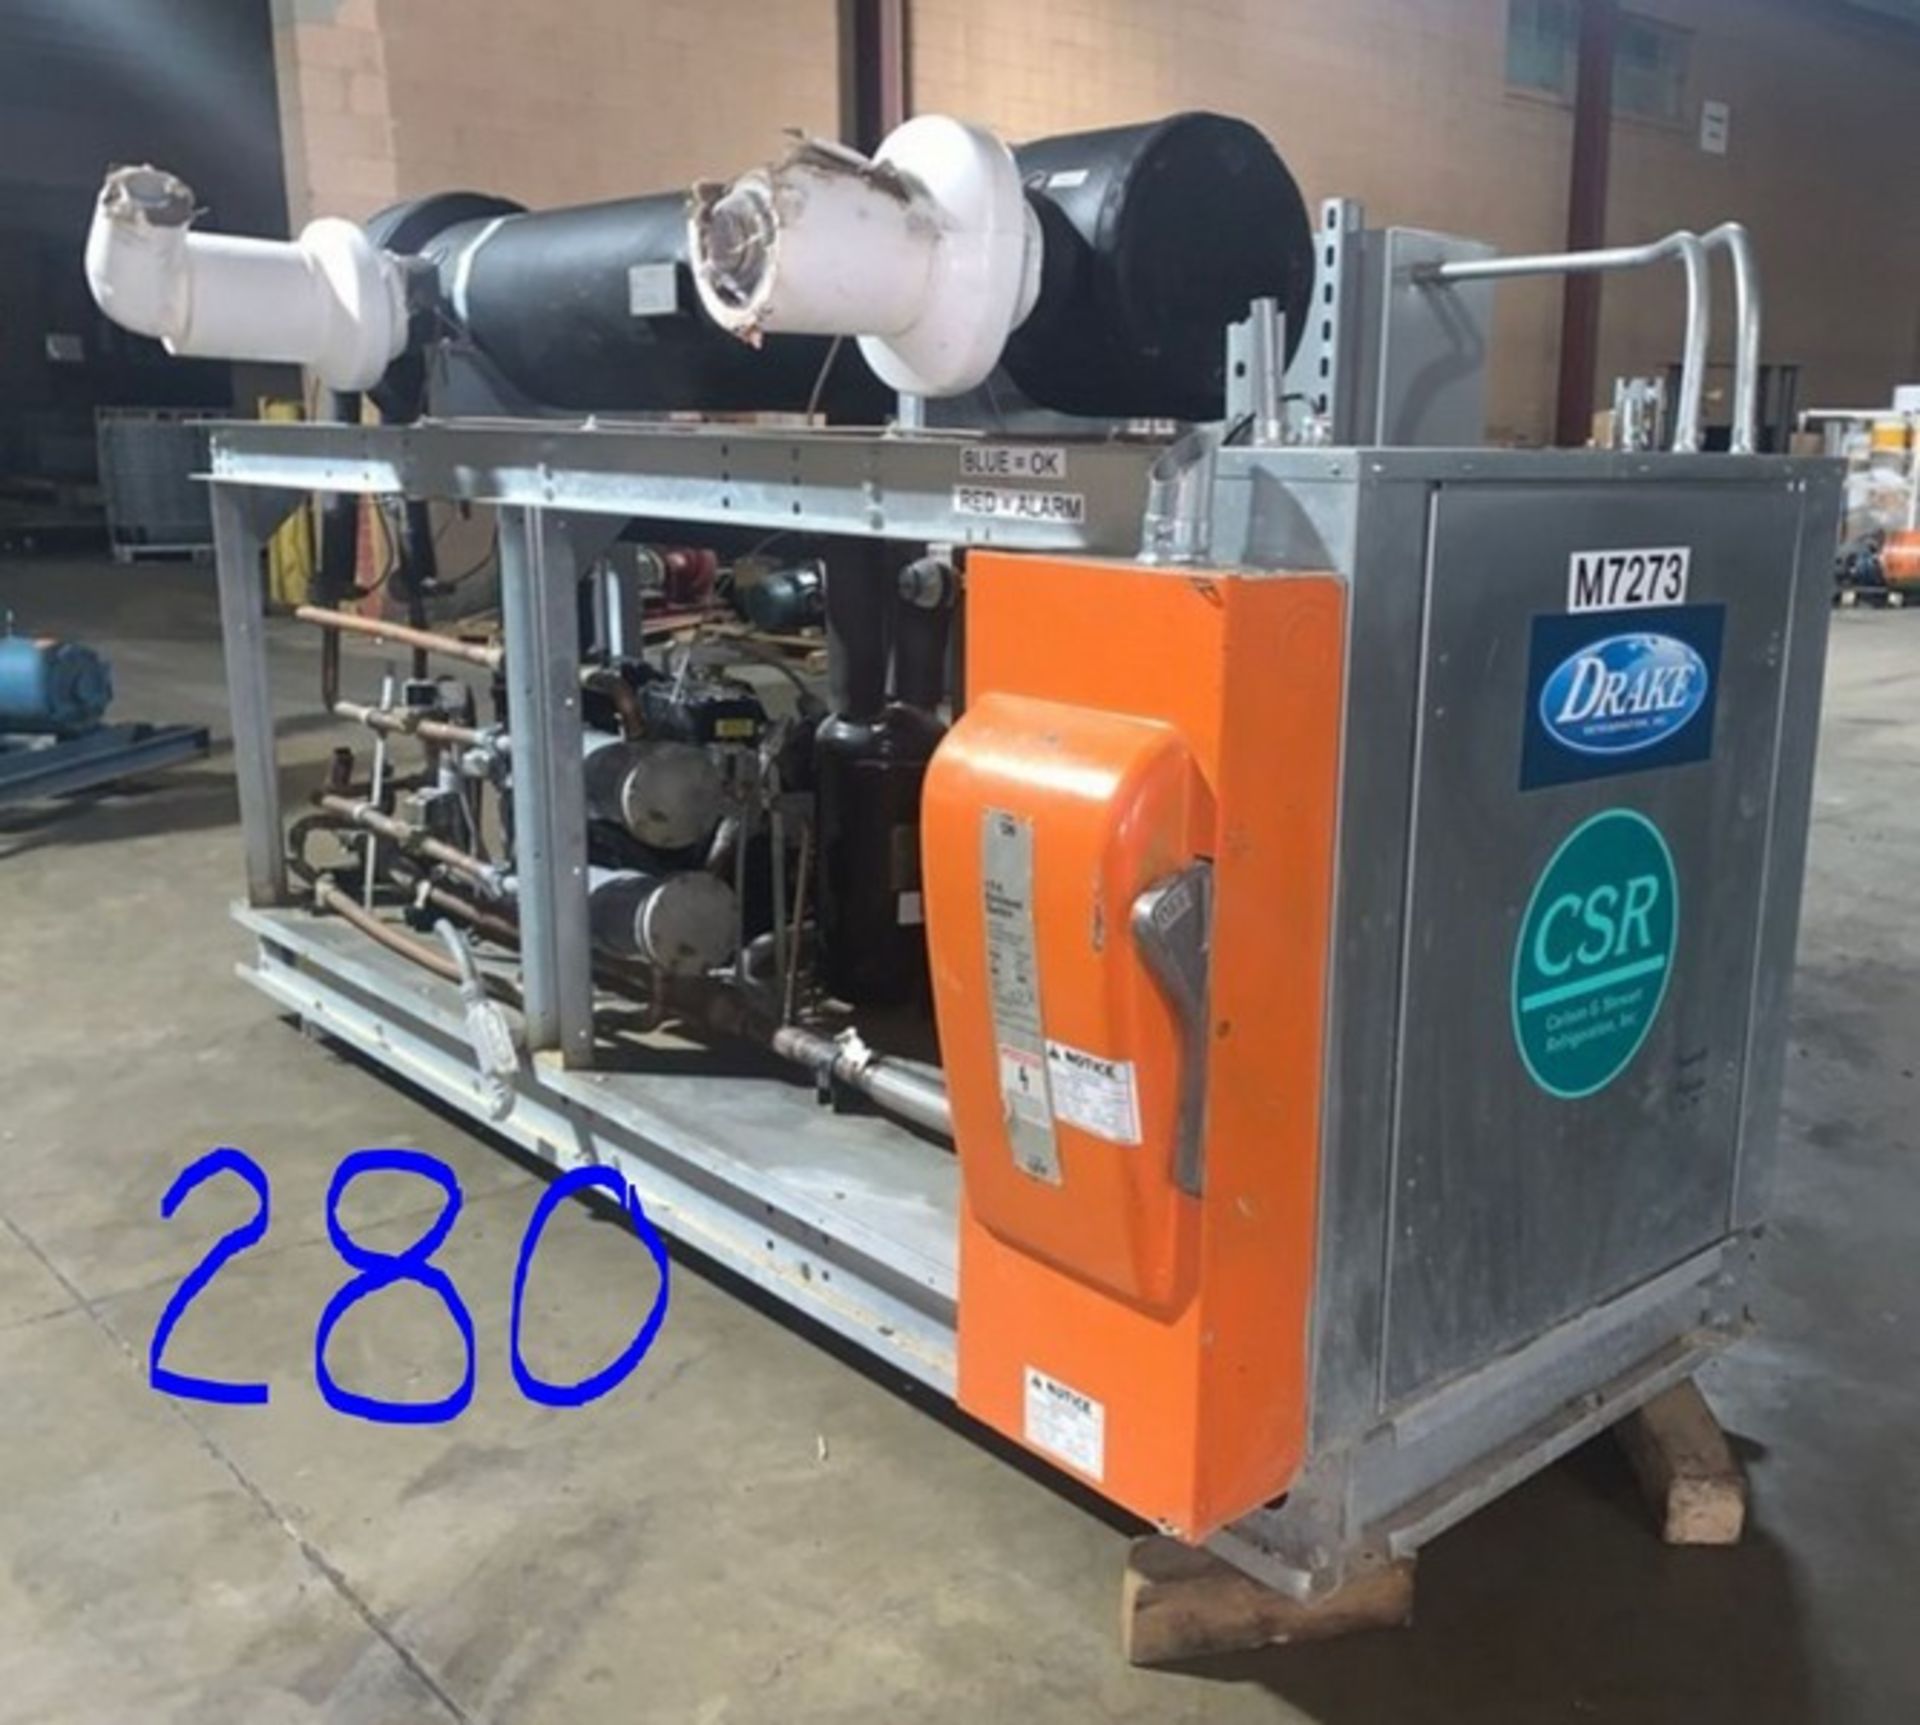 Drake 60 Ton Chiller 2014 with two Copeland compressors missing cover plates and heat exchanger (